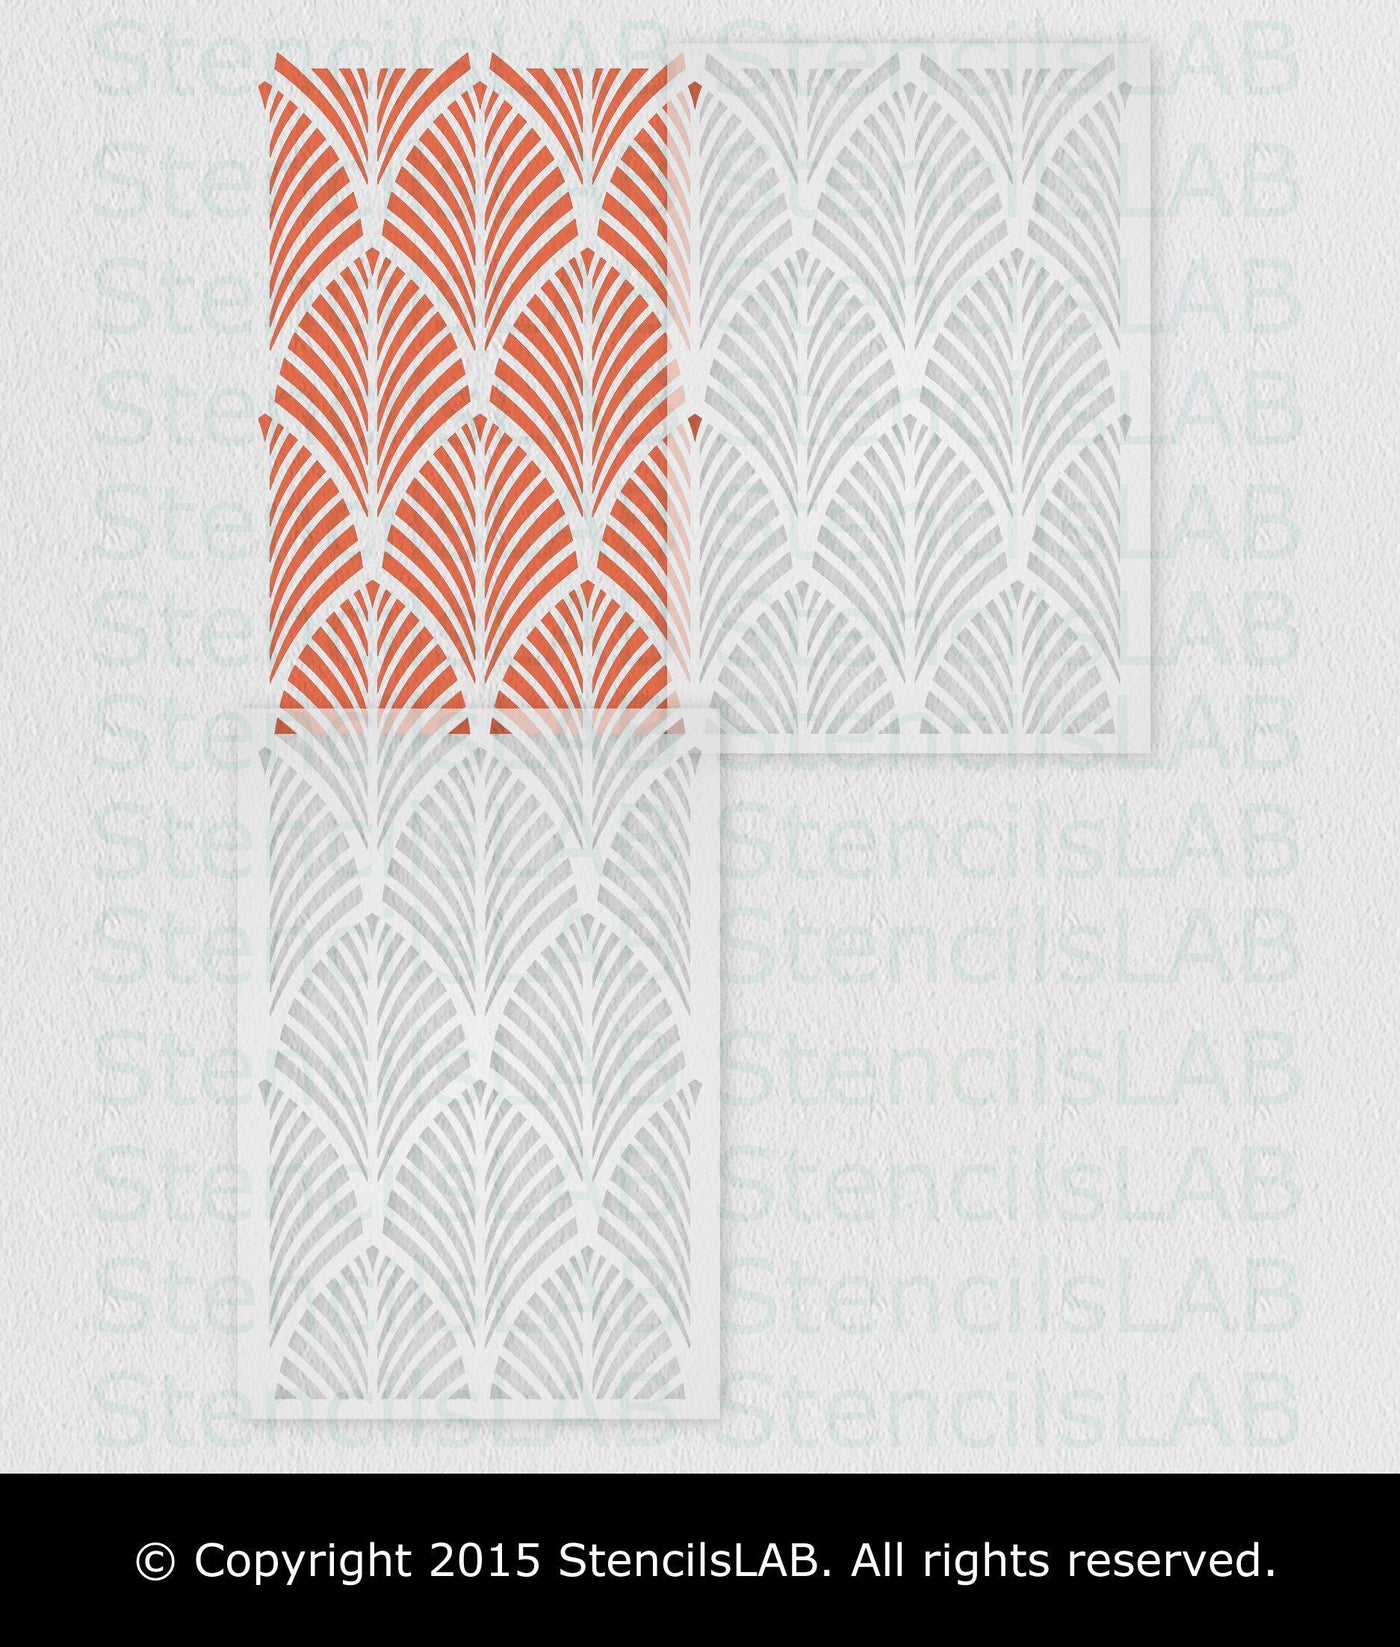 Palm- Allover Wall Stencil- Large Wall Stencils- Reusable Stencil for Painting S (12 x 18.4)